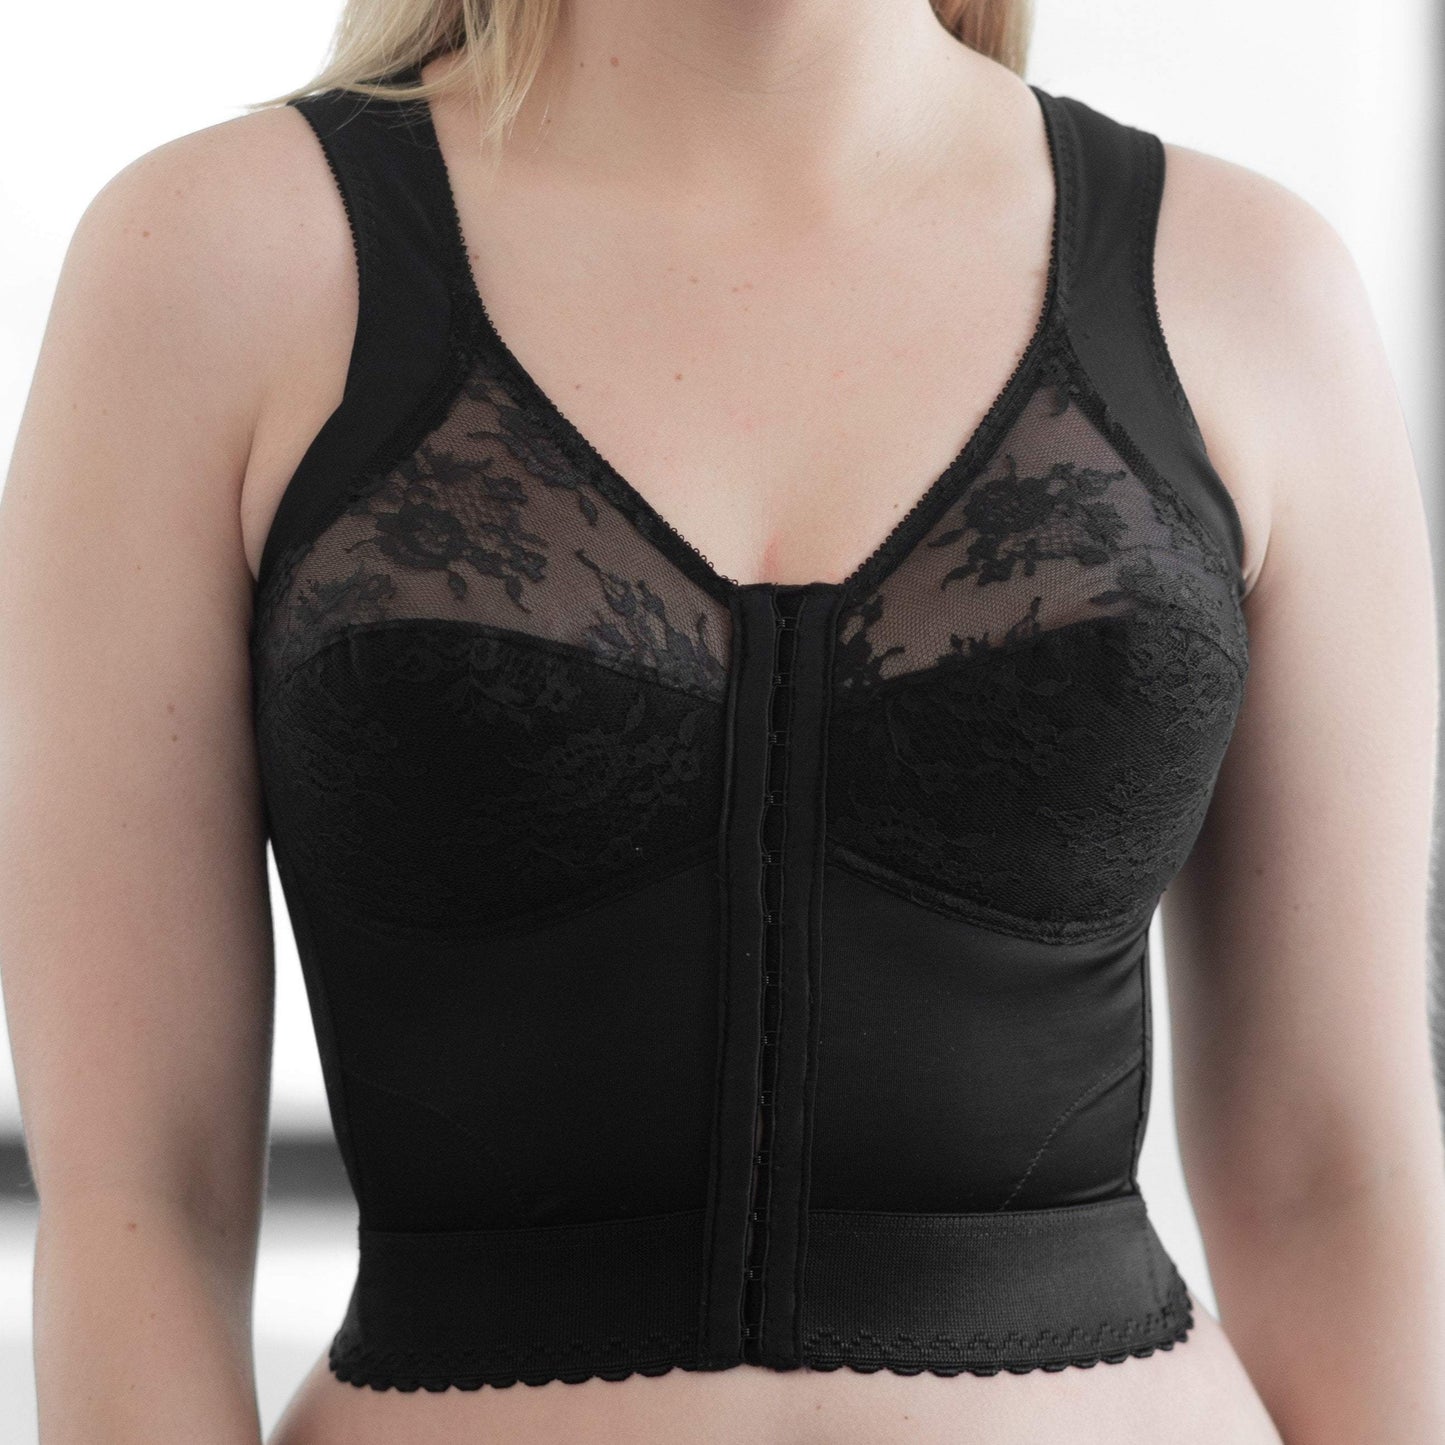 Style 9603 | Front Closure Back Support Long Line Bra - Black